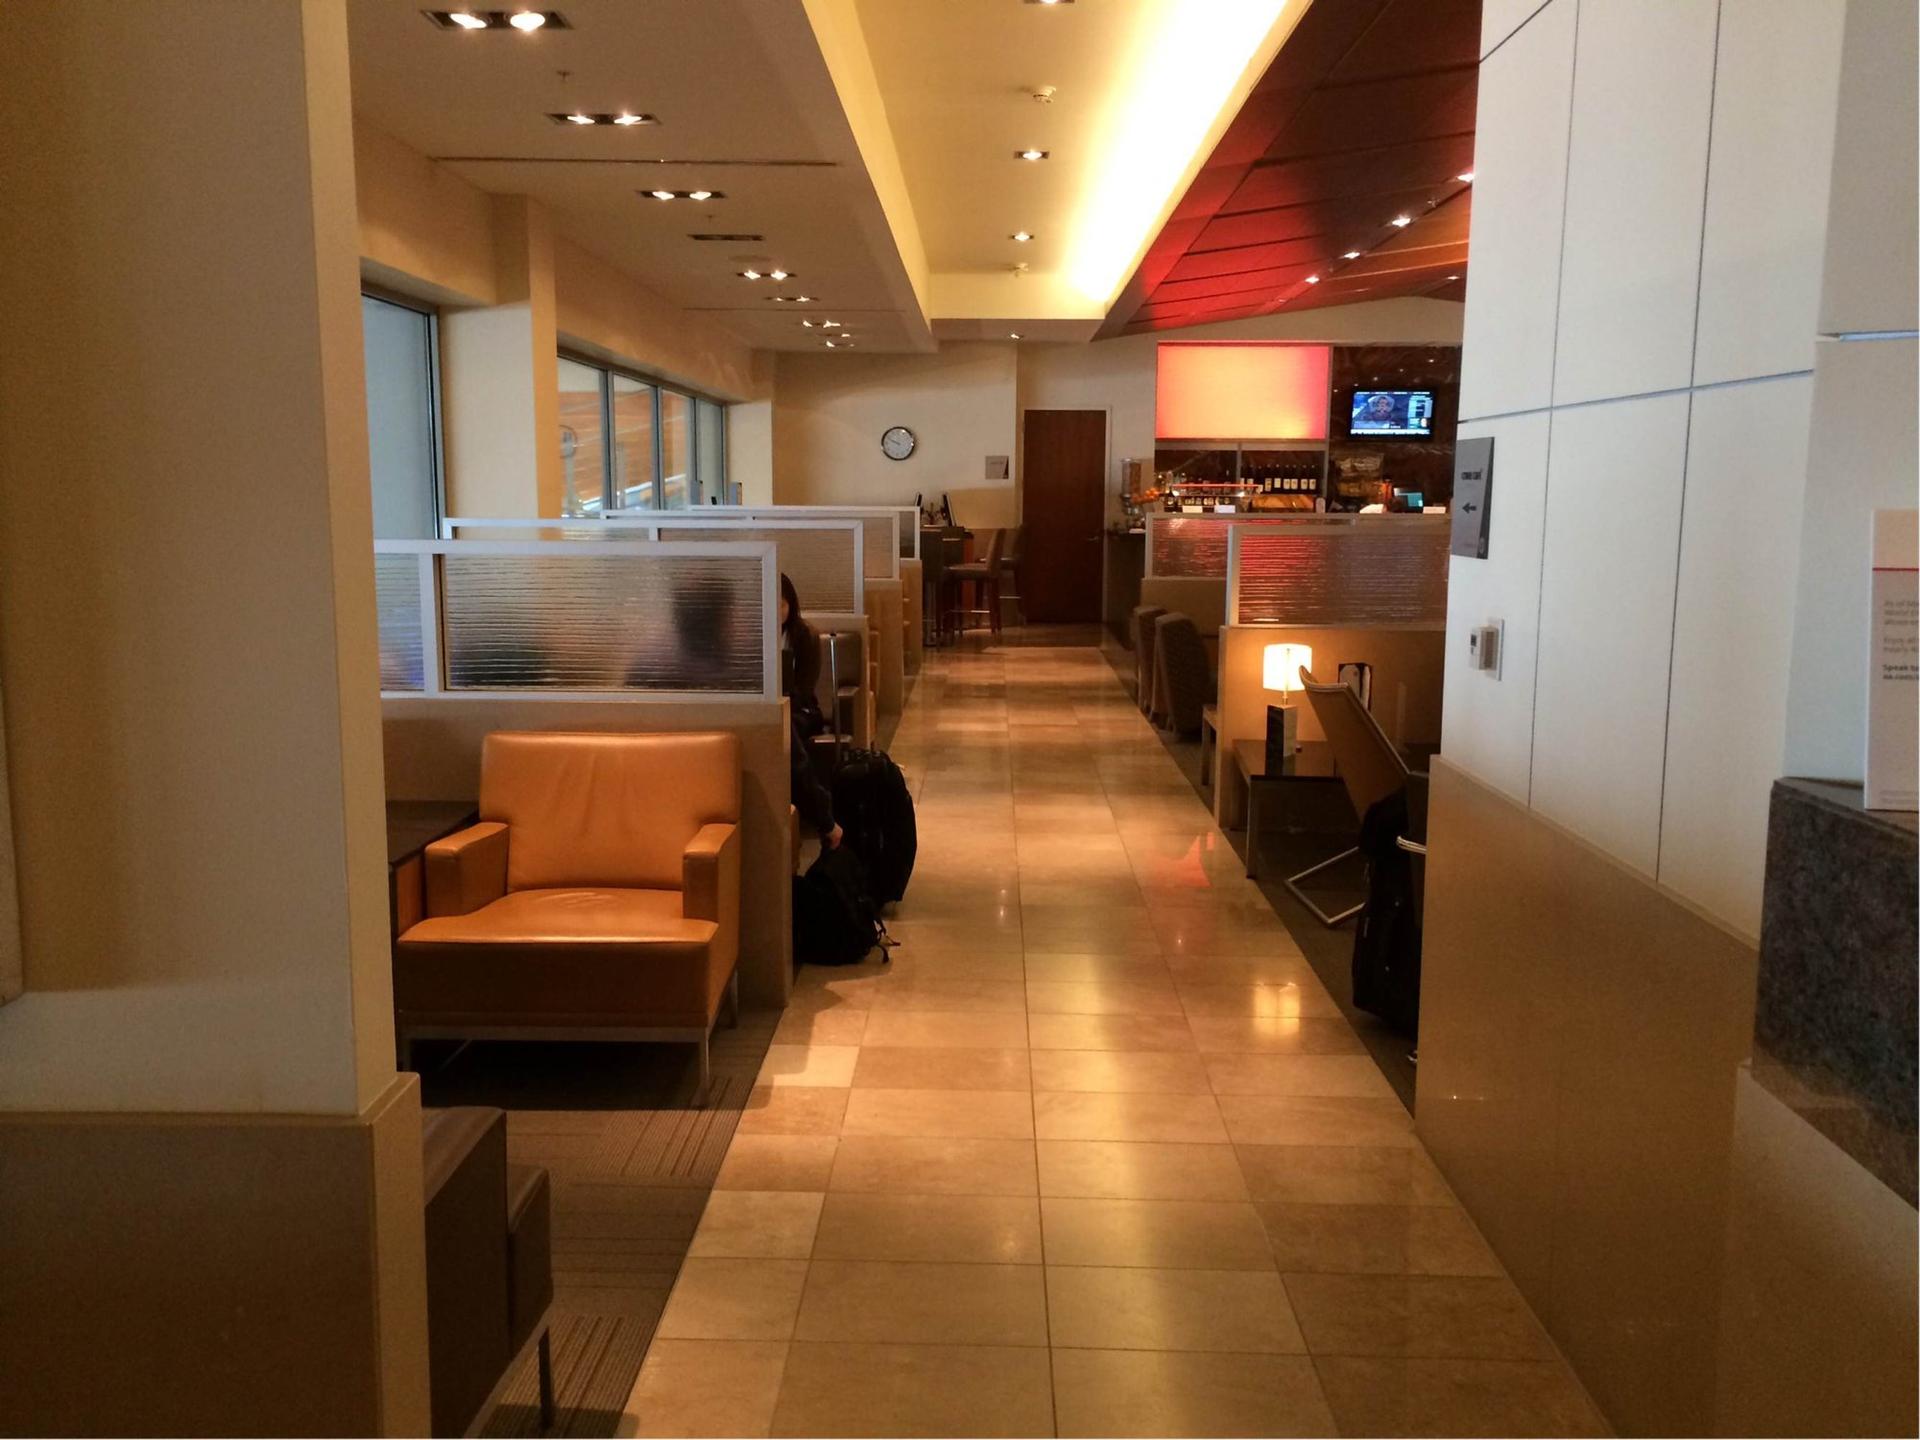 American Airlines Admirals Club image 9 of 31